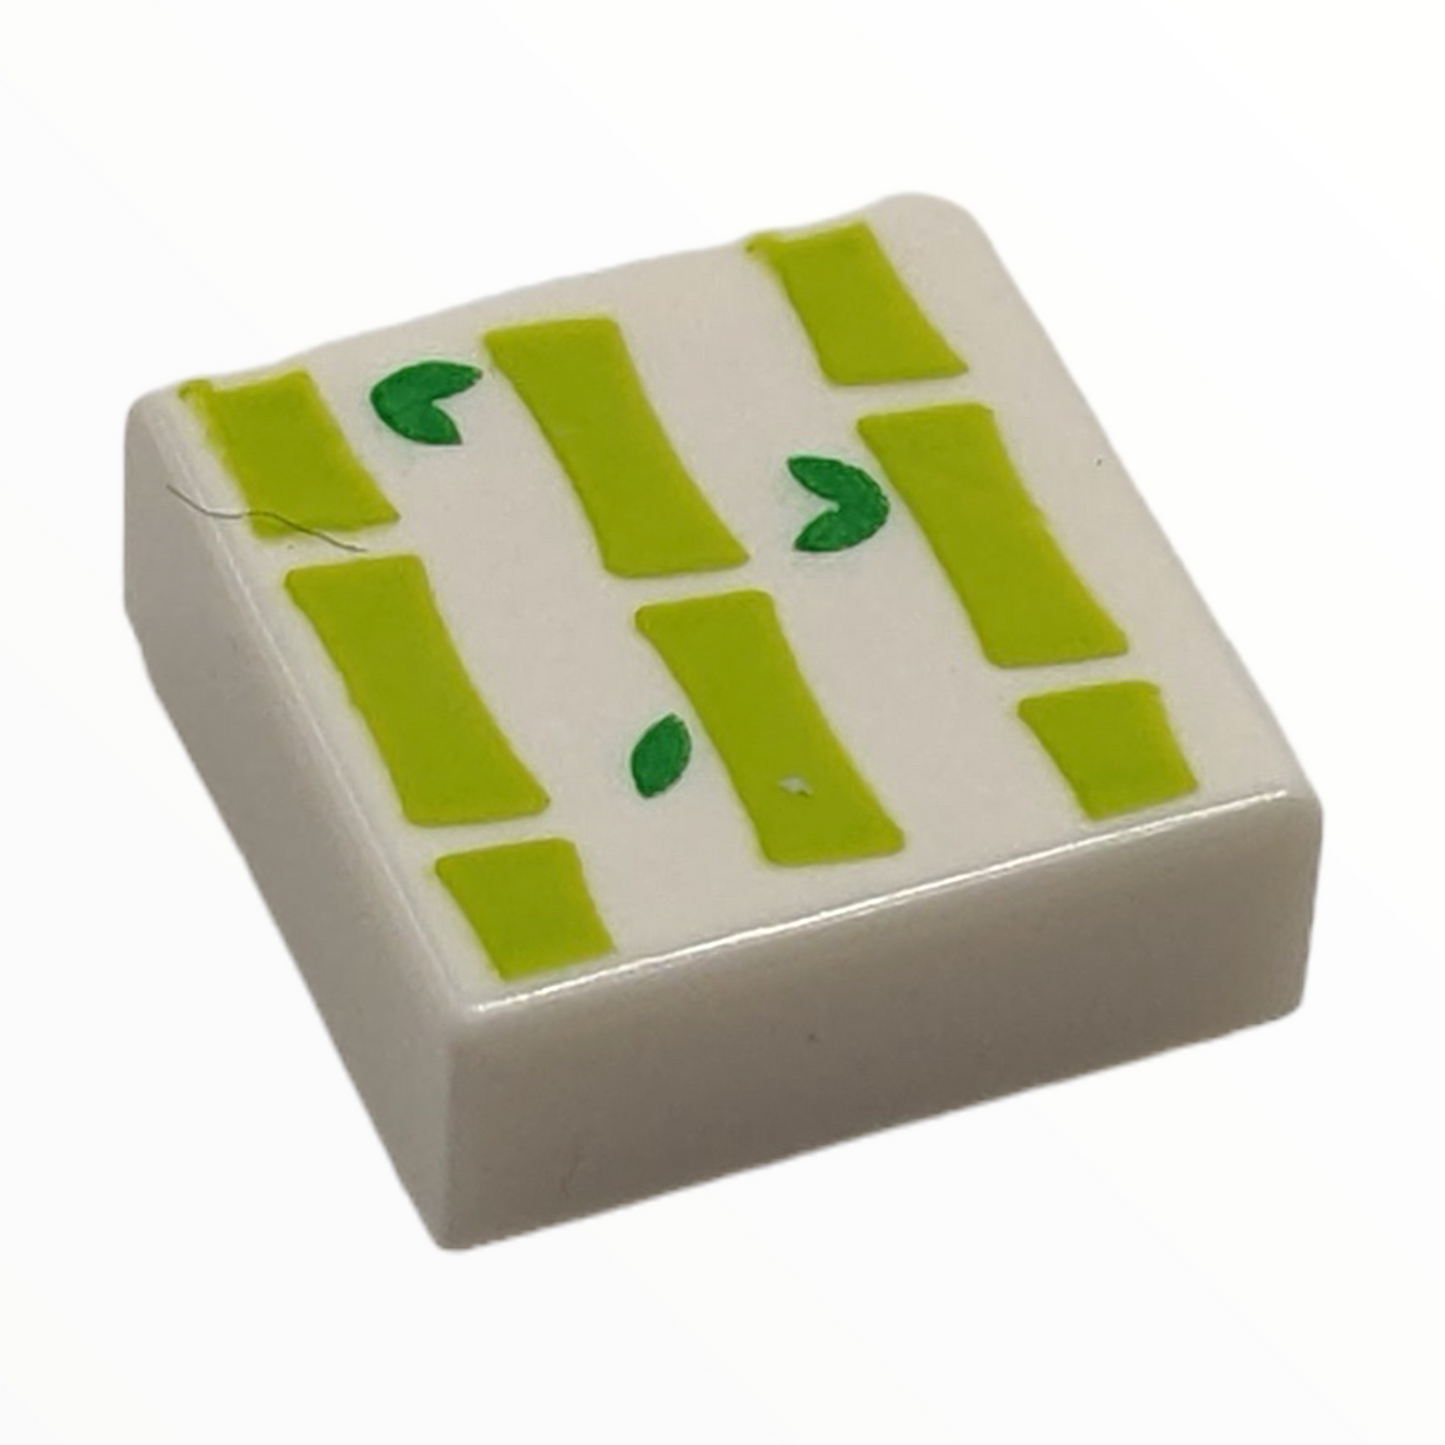 LEGO Tile 1x1 - Lime Stripes and Green Leaves (Bamboo)